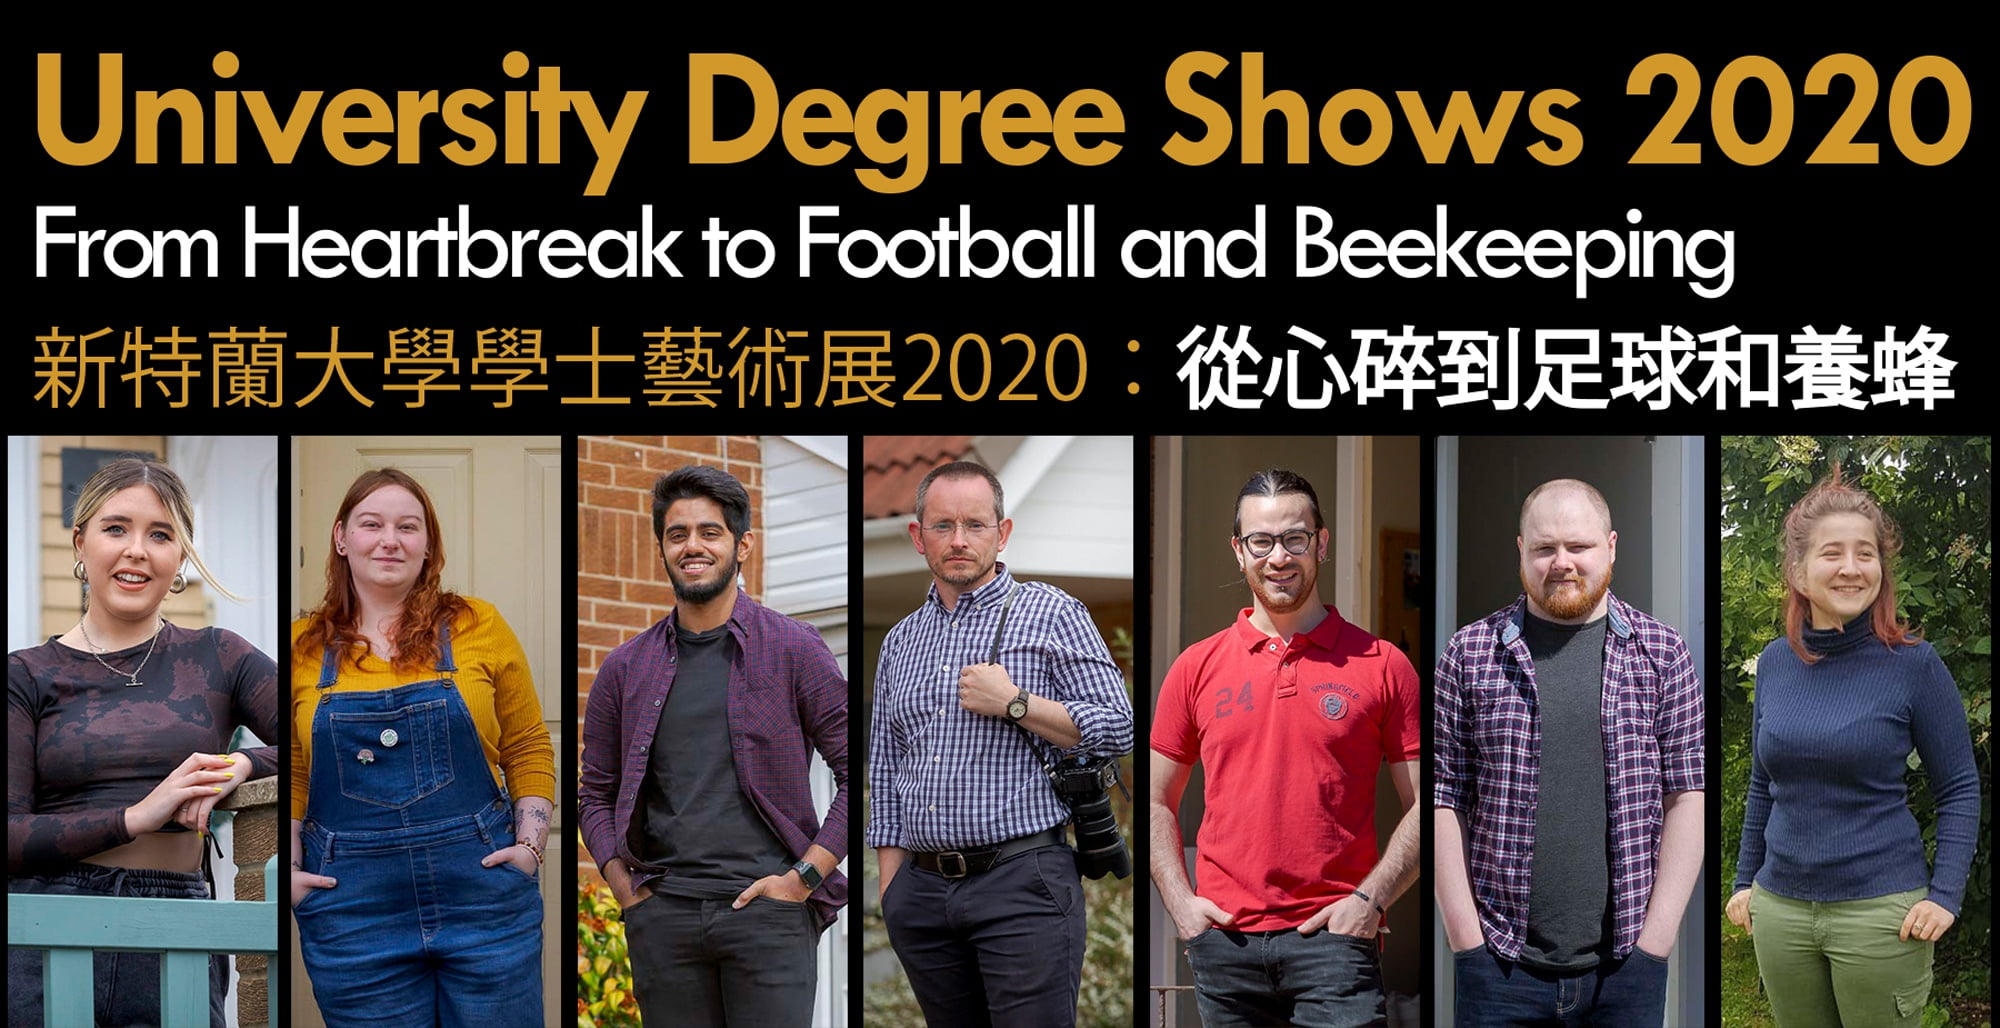 University-Degree-Shows-2020-From-Heartbreak-to-Football-and-Beekeeping